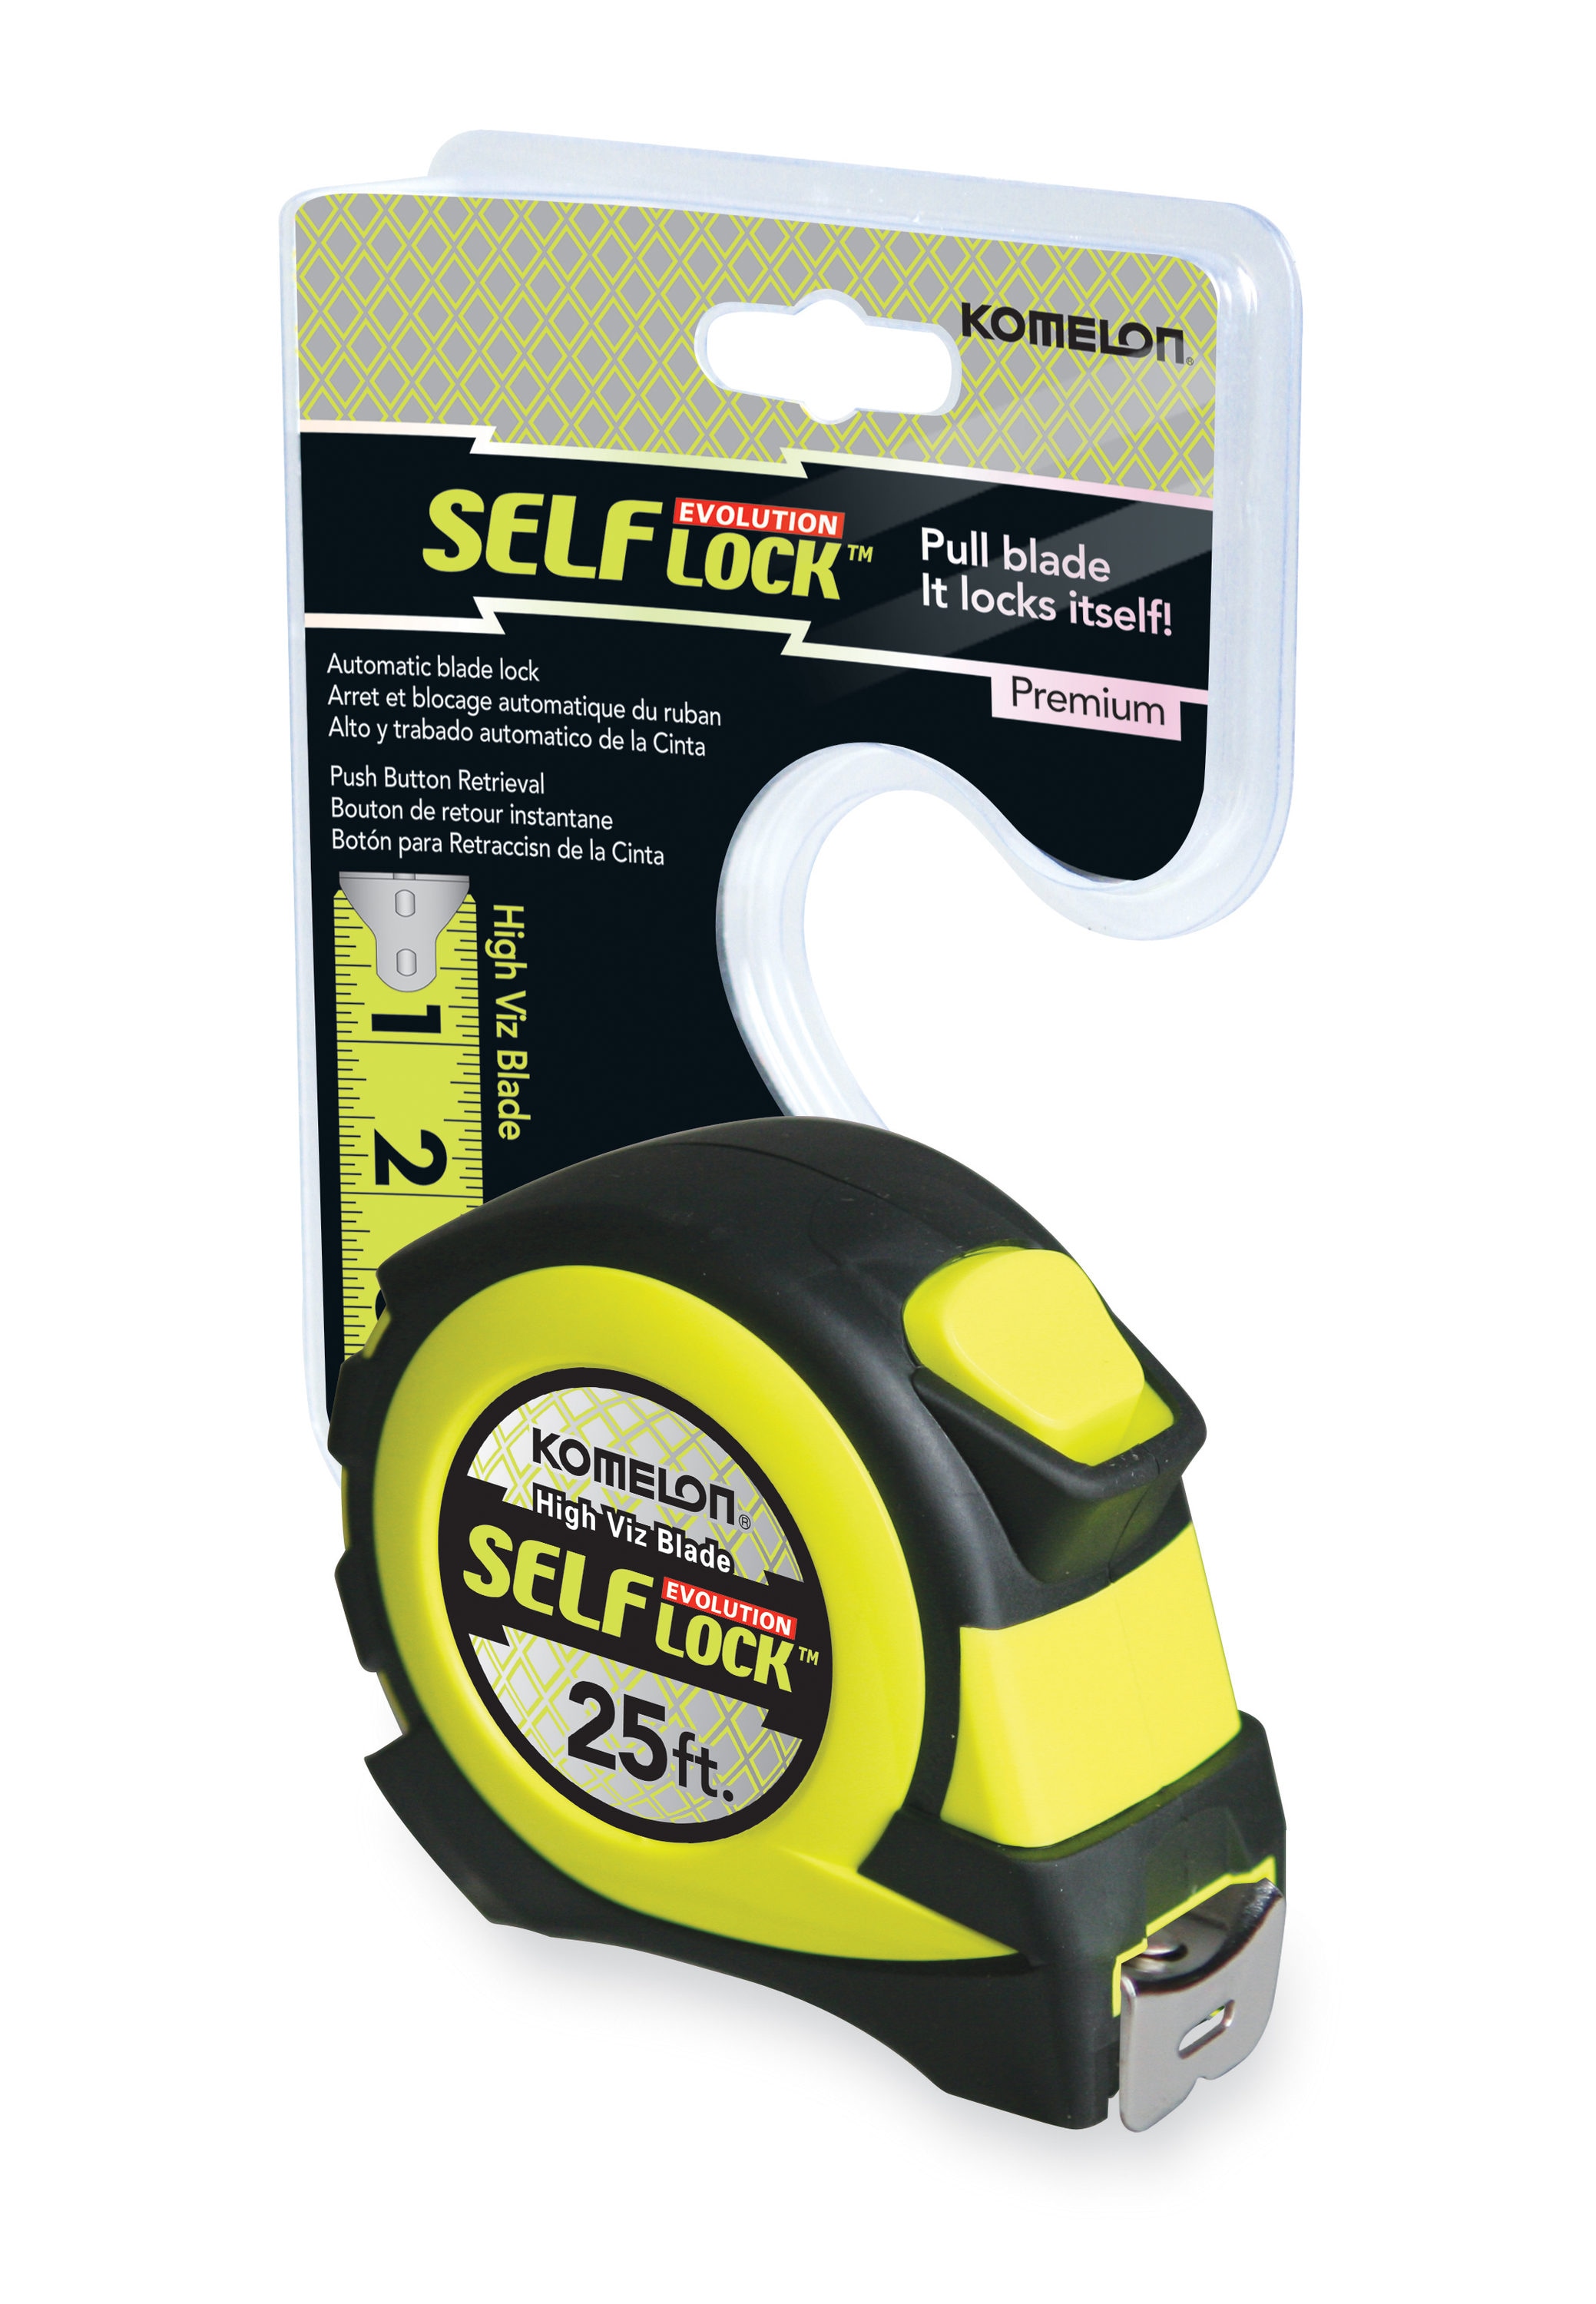 4-Pack] 25Ft/7.5m AutoLock Tape Measure  1-Inch Wide Blade With Nylo –